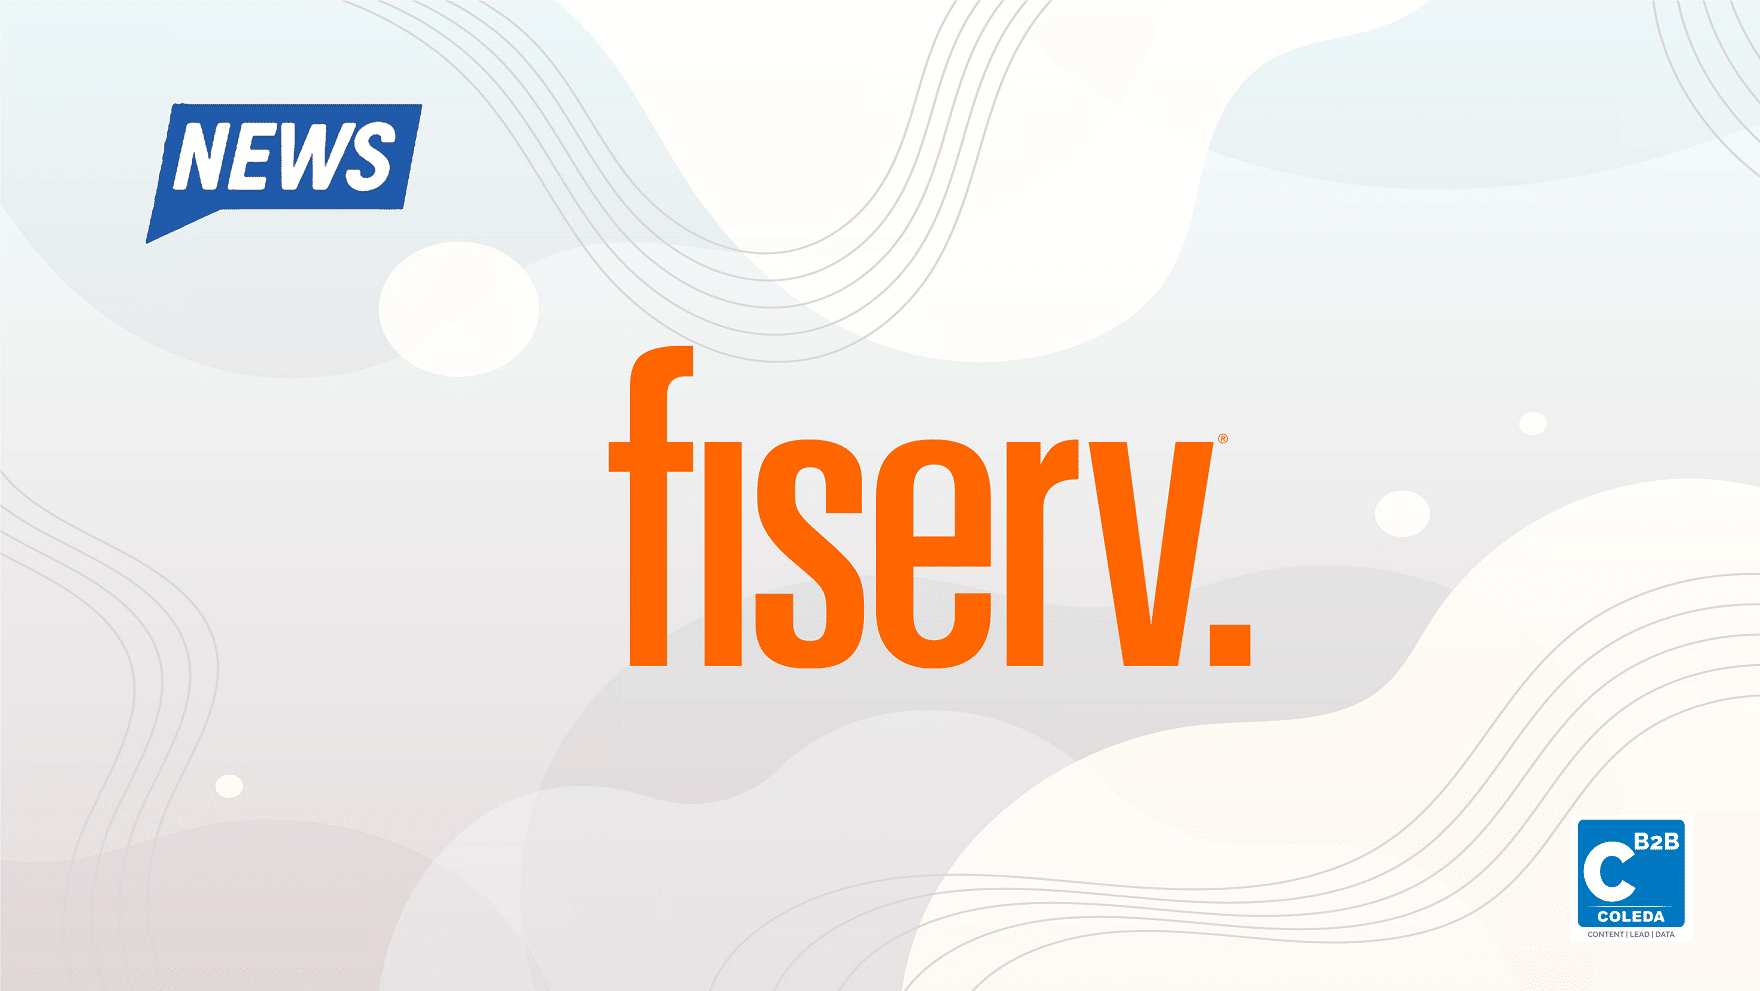 Fiserv is listed among Forbes' best employers in America for 2023